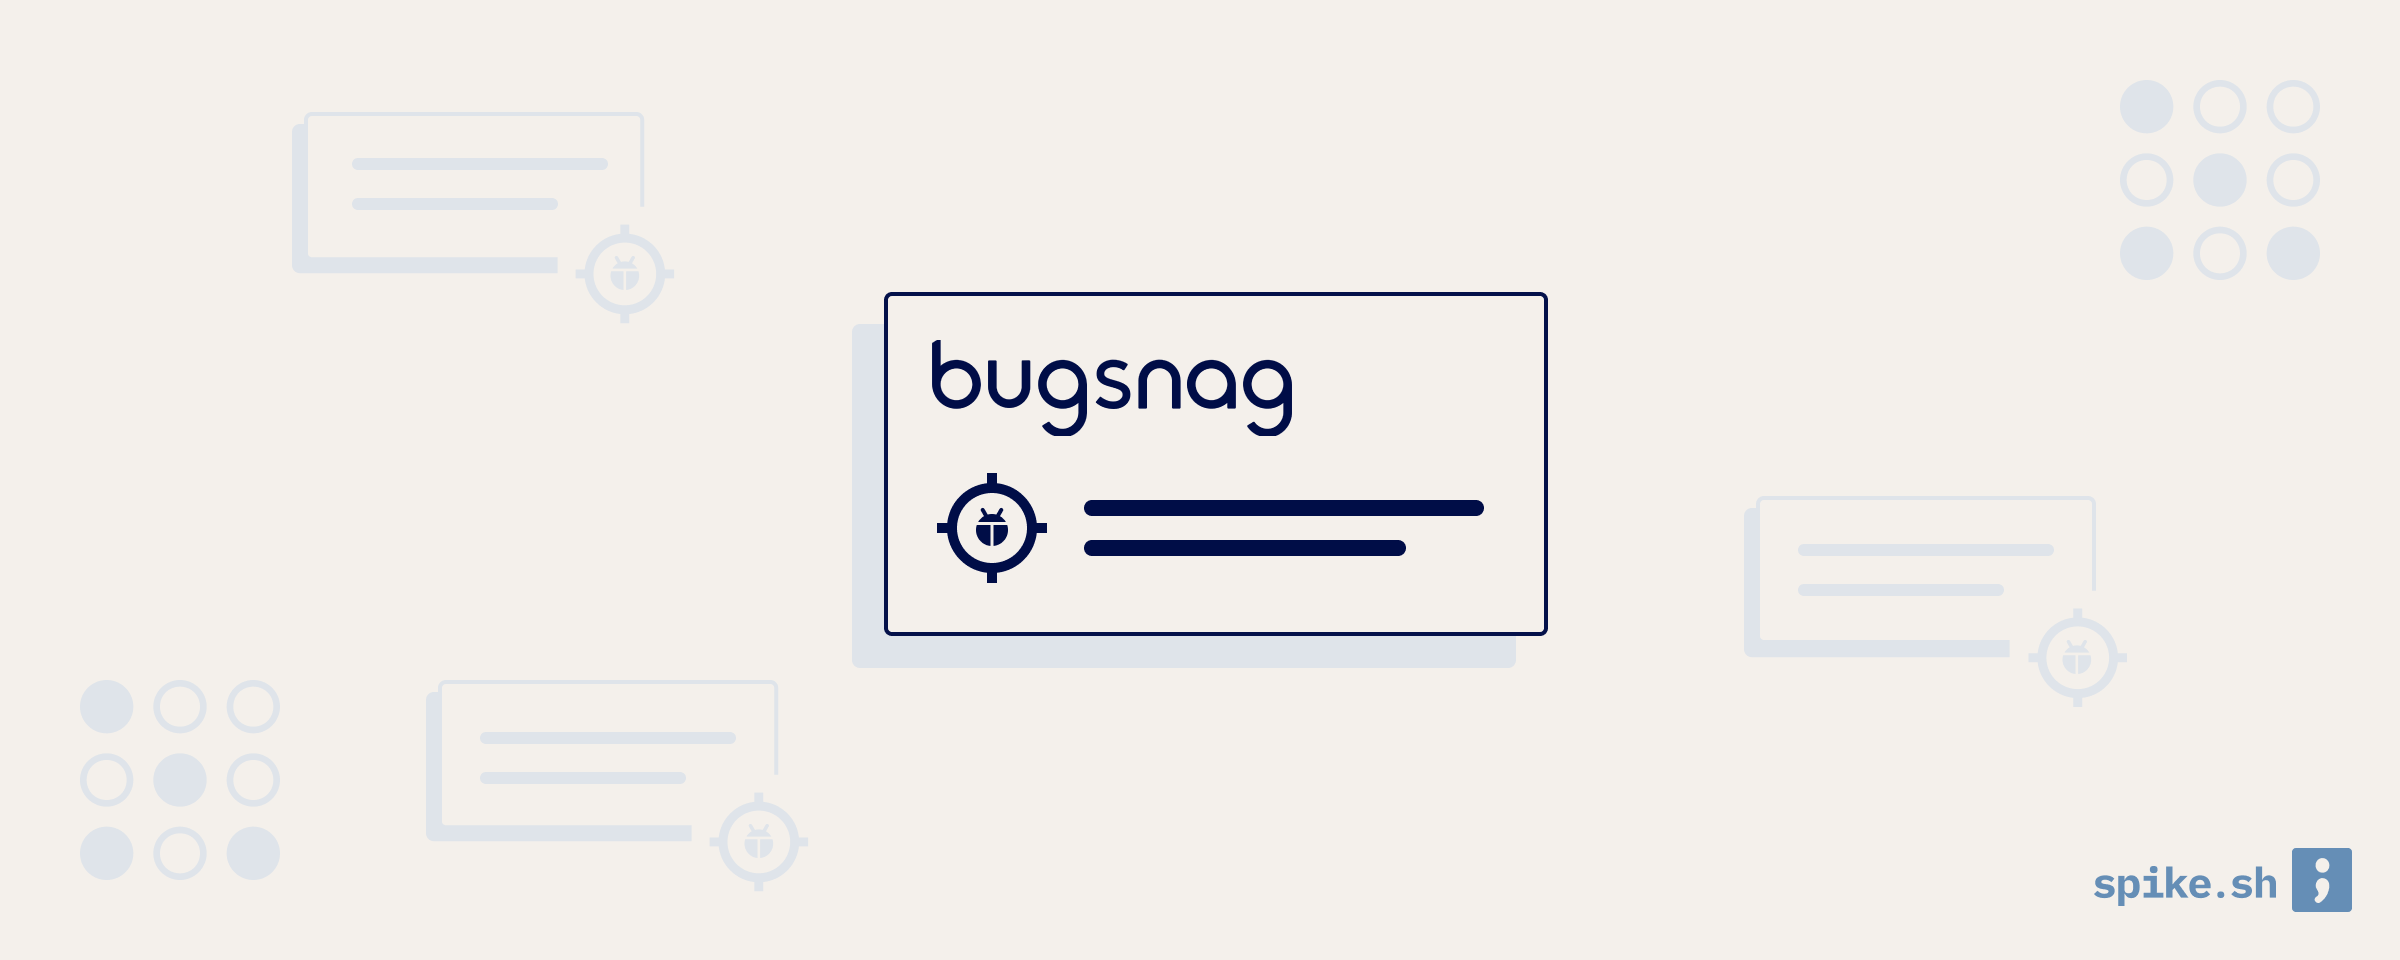 How to track application errors with Bugsnag